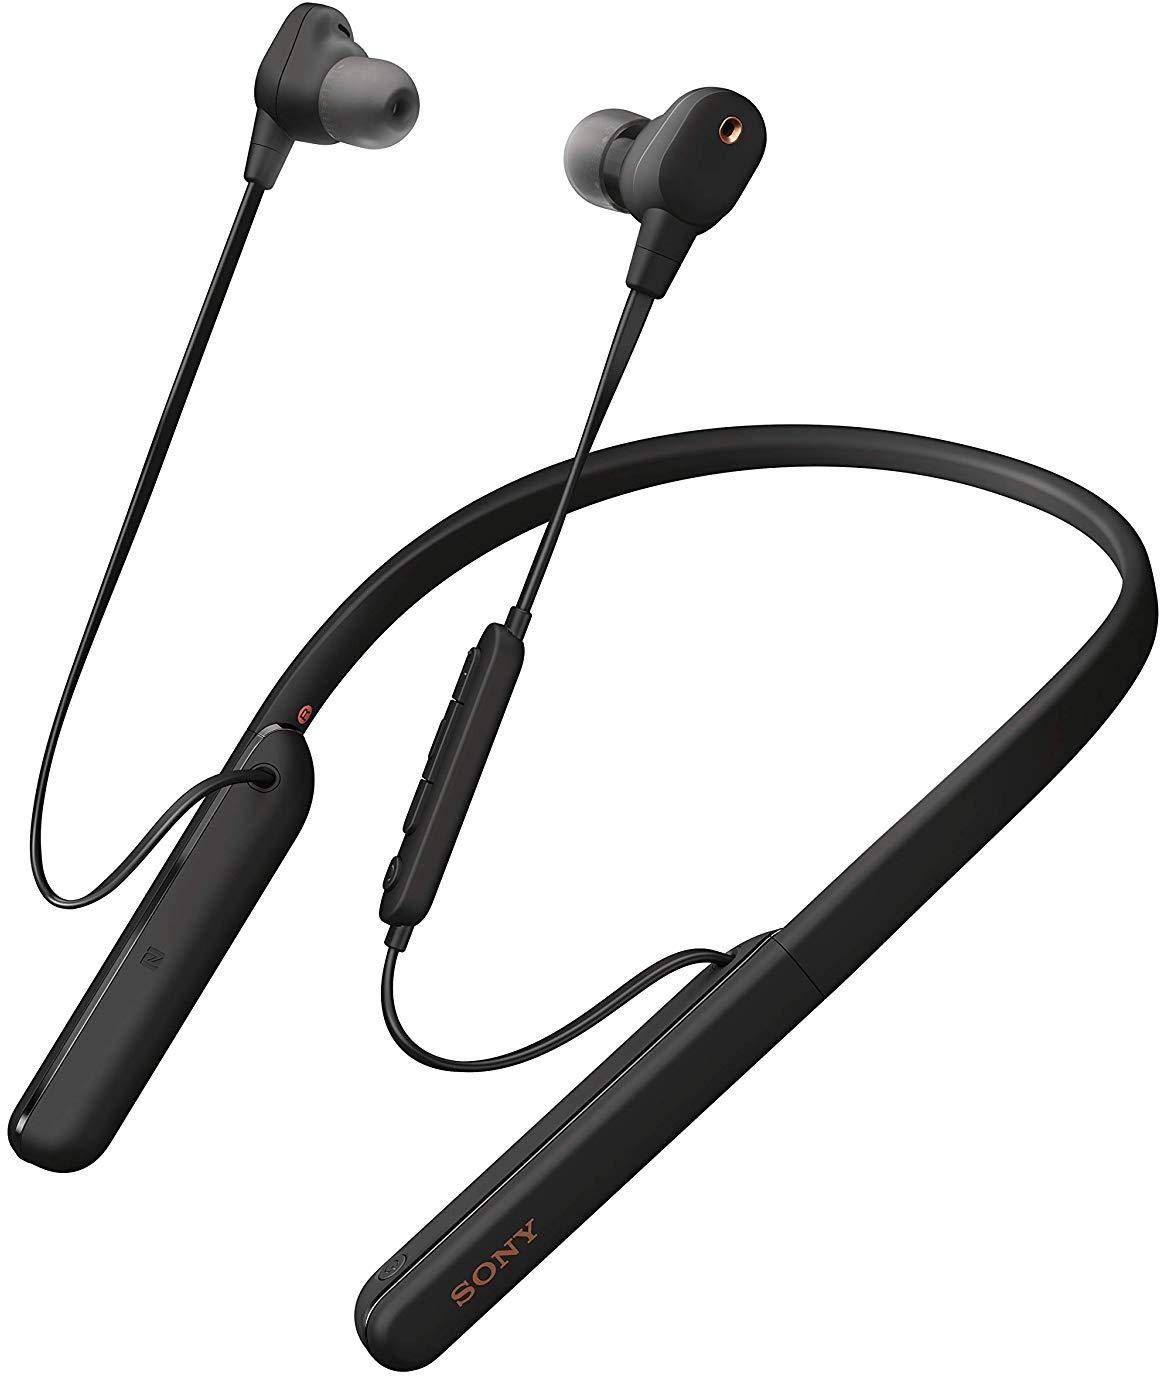 Sony WI 1000XM2 Wireless Neckband Premium Noise Cancellation Hi-Res In Ear Headphone zoom image